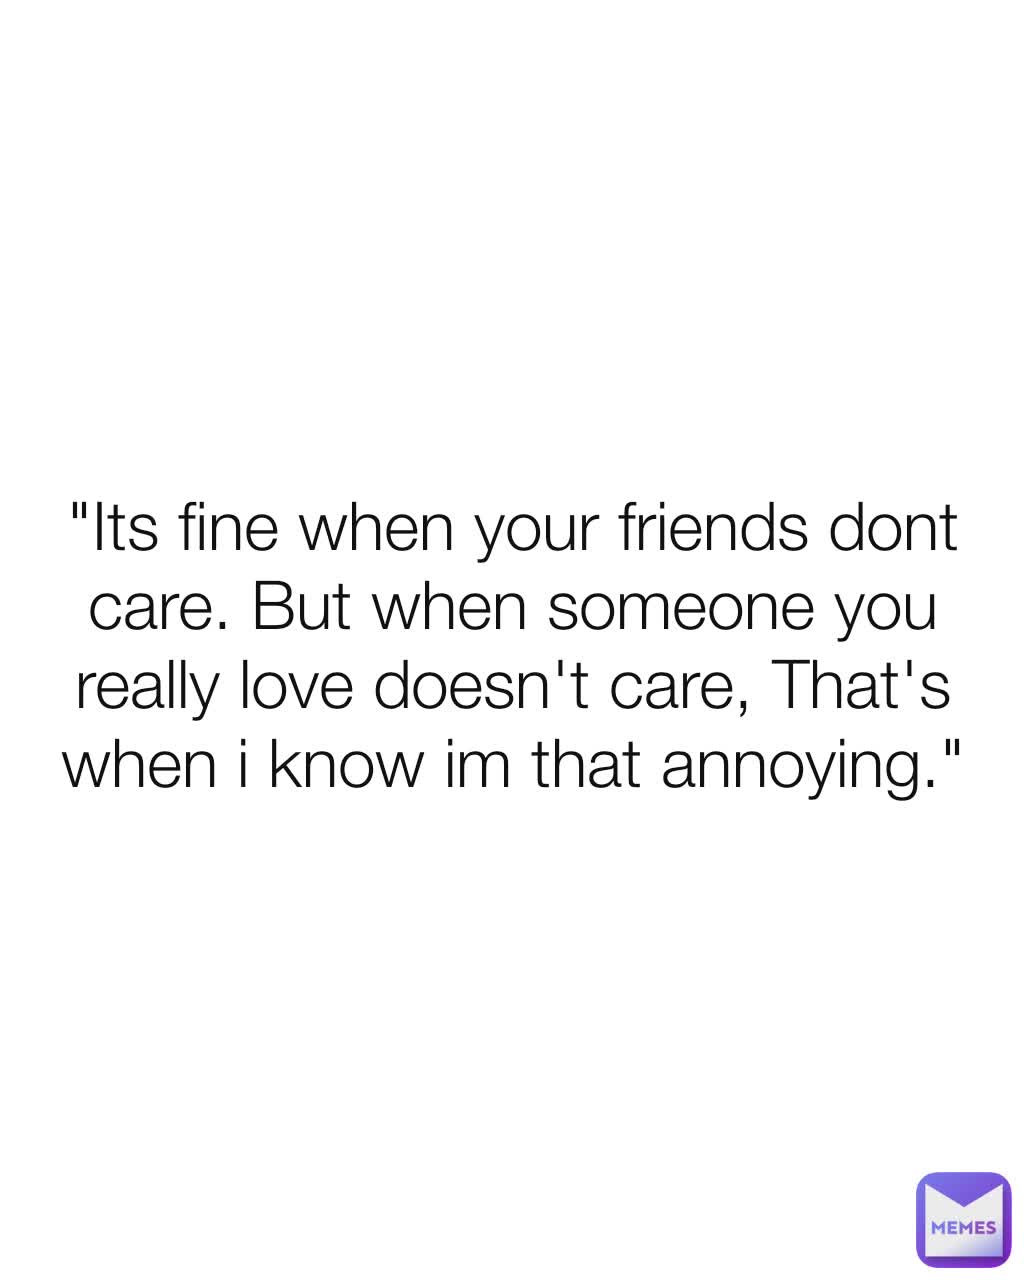 "Its fine when your friends dont care. But when someone you really love doesn't care, That's when i know im that annoying."